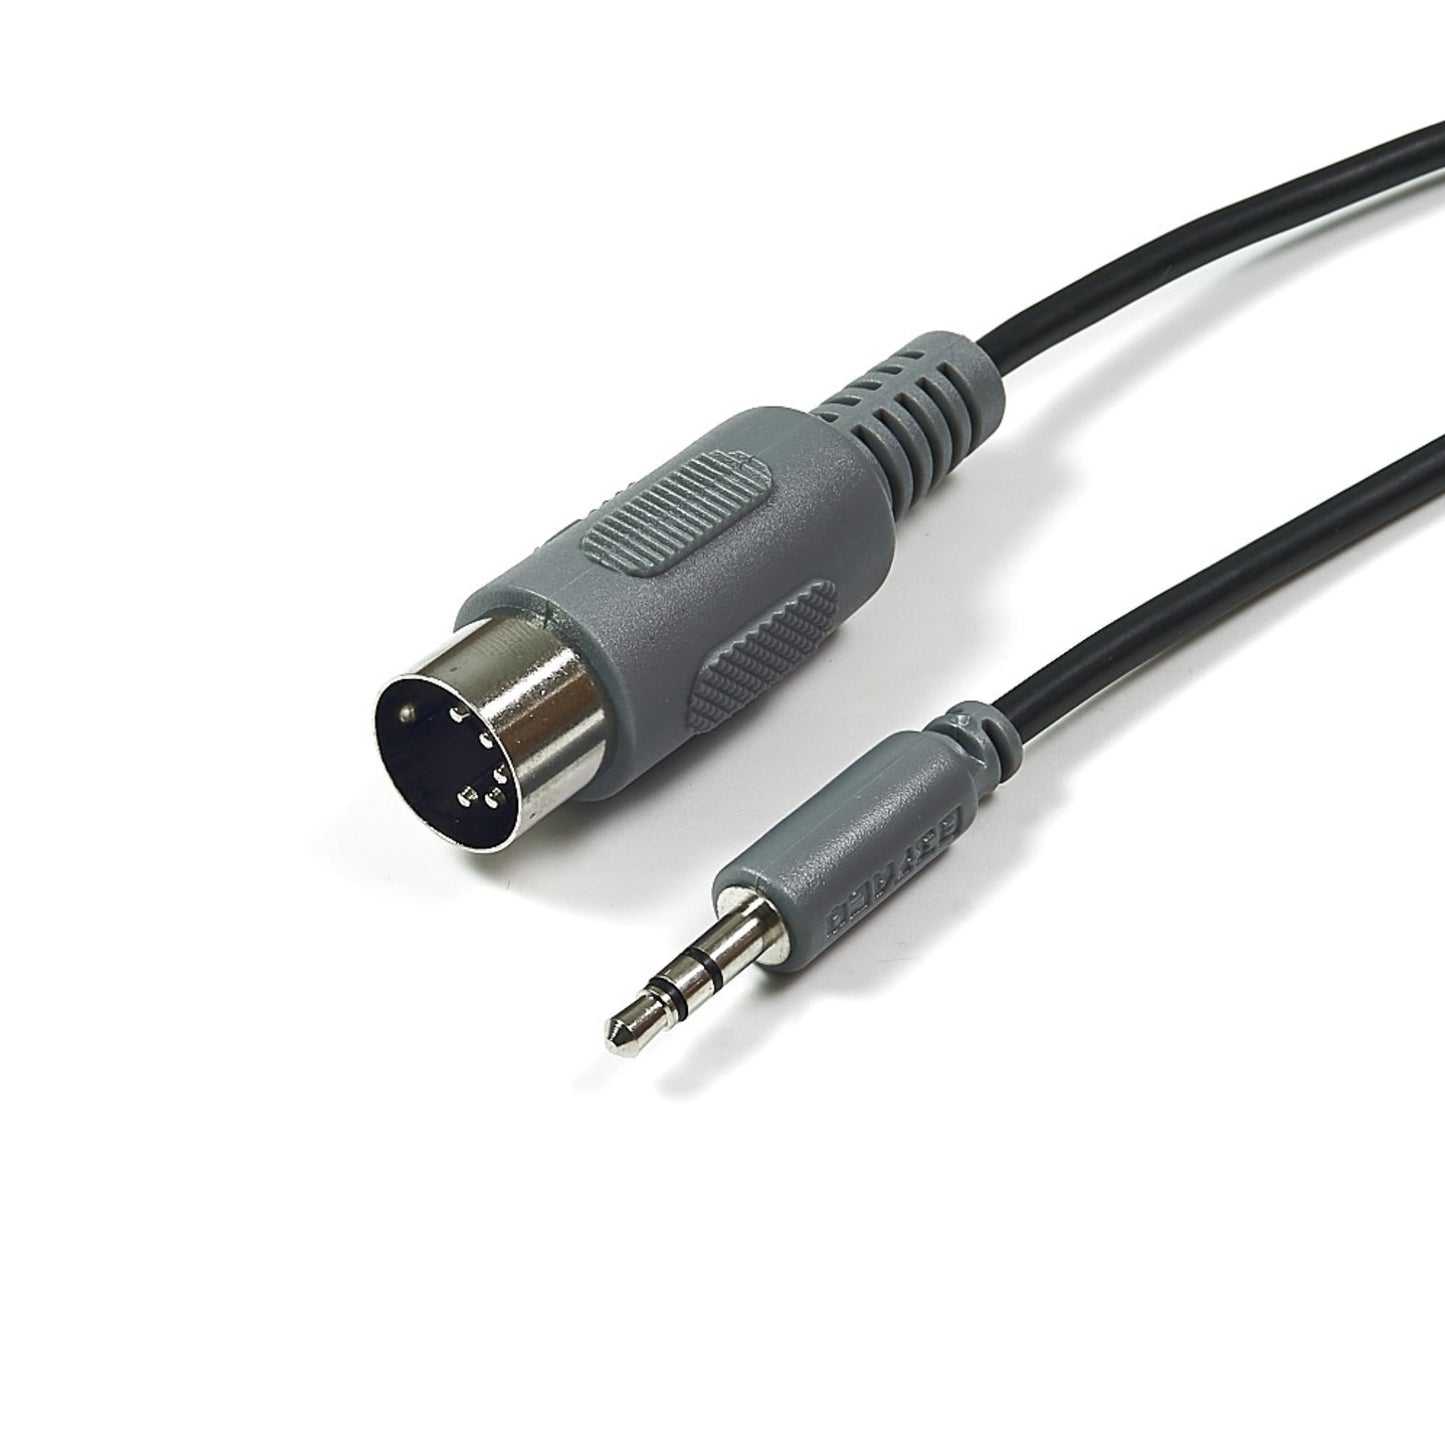 DIN 5 MIDI to TRS Cable - 150cm - 3 pack (Type B)